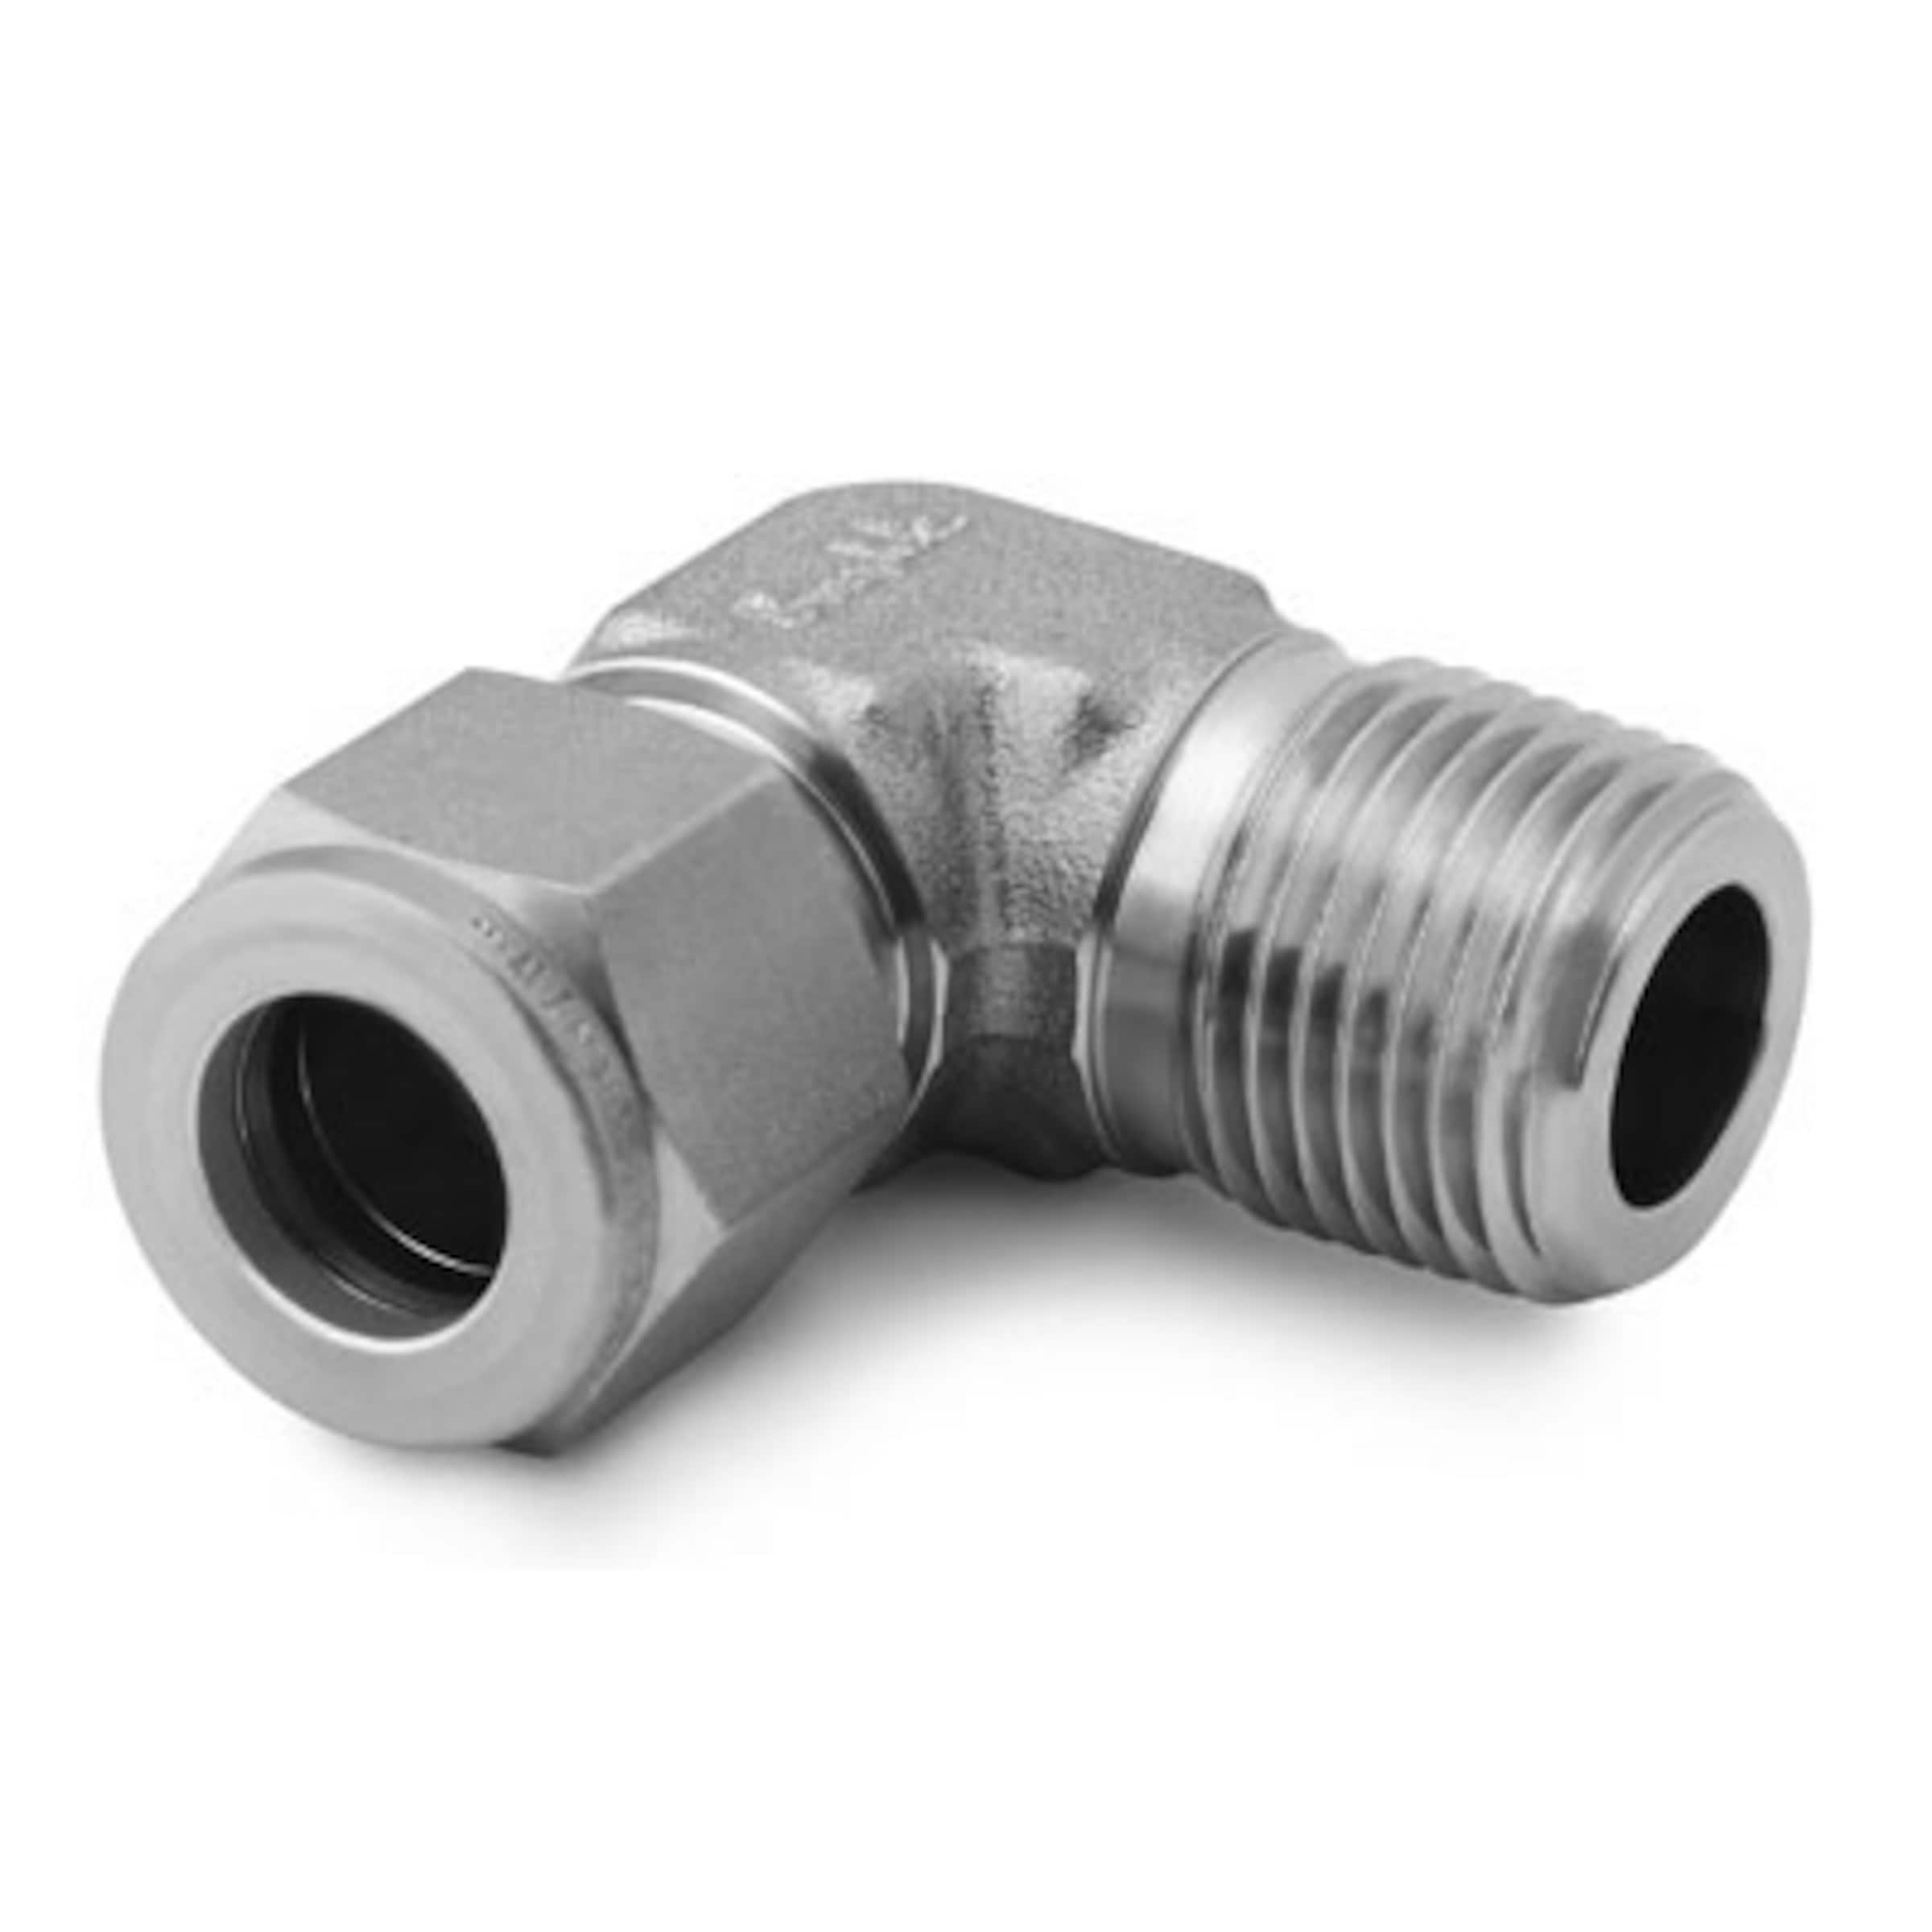 SSP Grip® 3/8 Tube OD x 1/2 NPT Male Pipe 90 ELBOW CONNECTOR 316 Stainless Steel